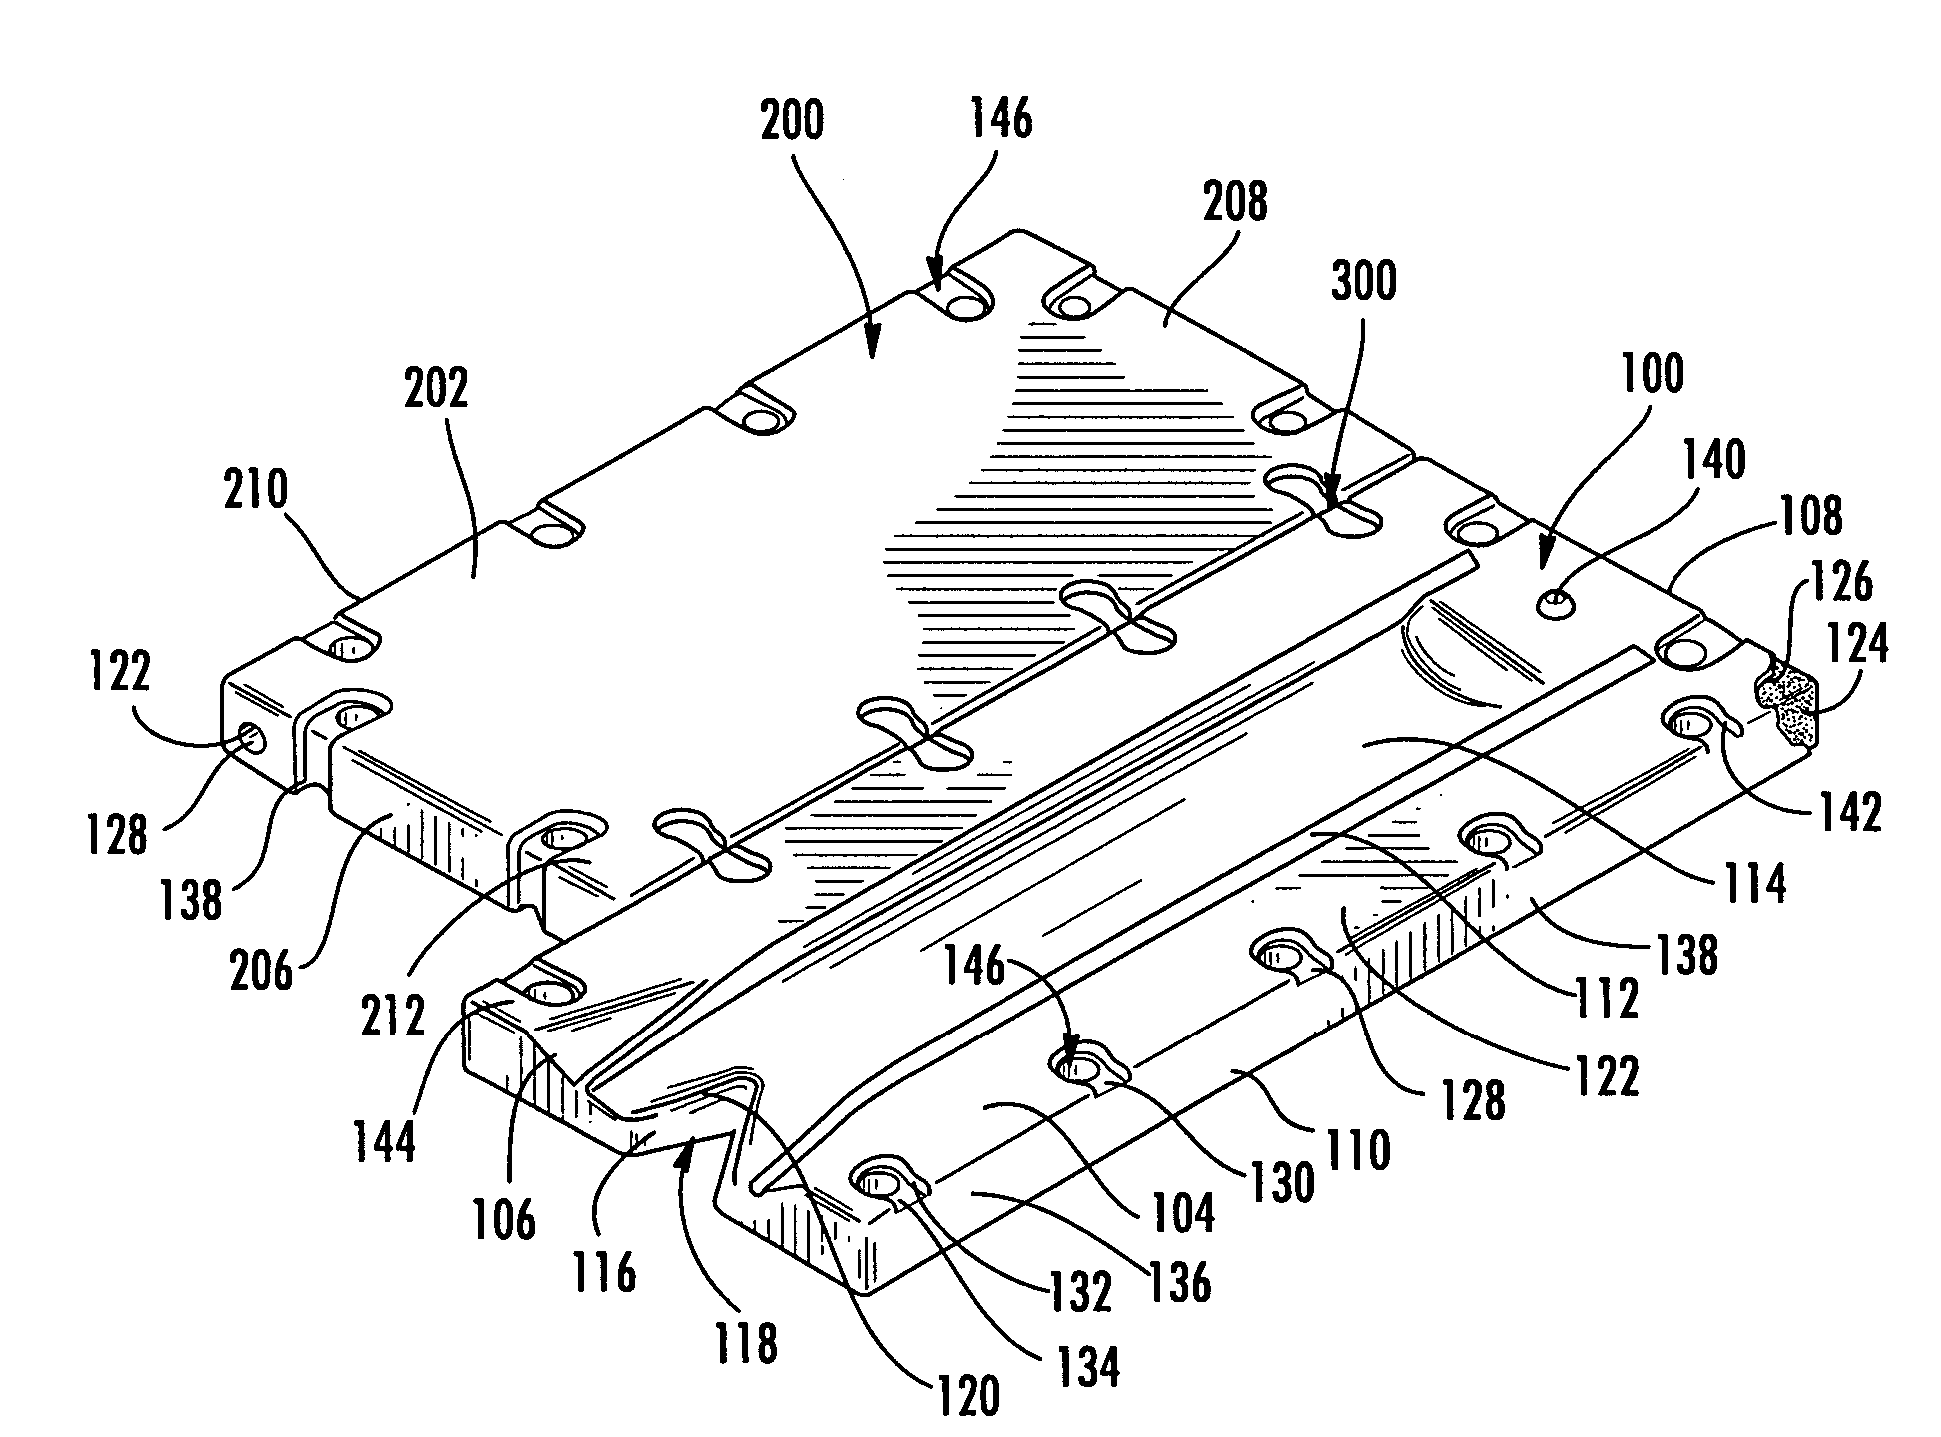 Connecting link assembly and socket arrangement for assembly of floating drive-on dry docks